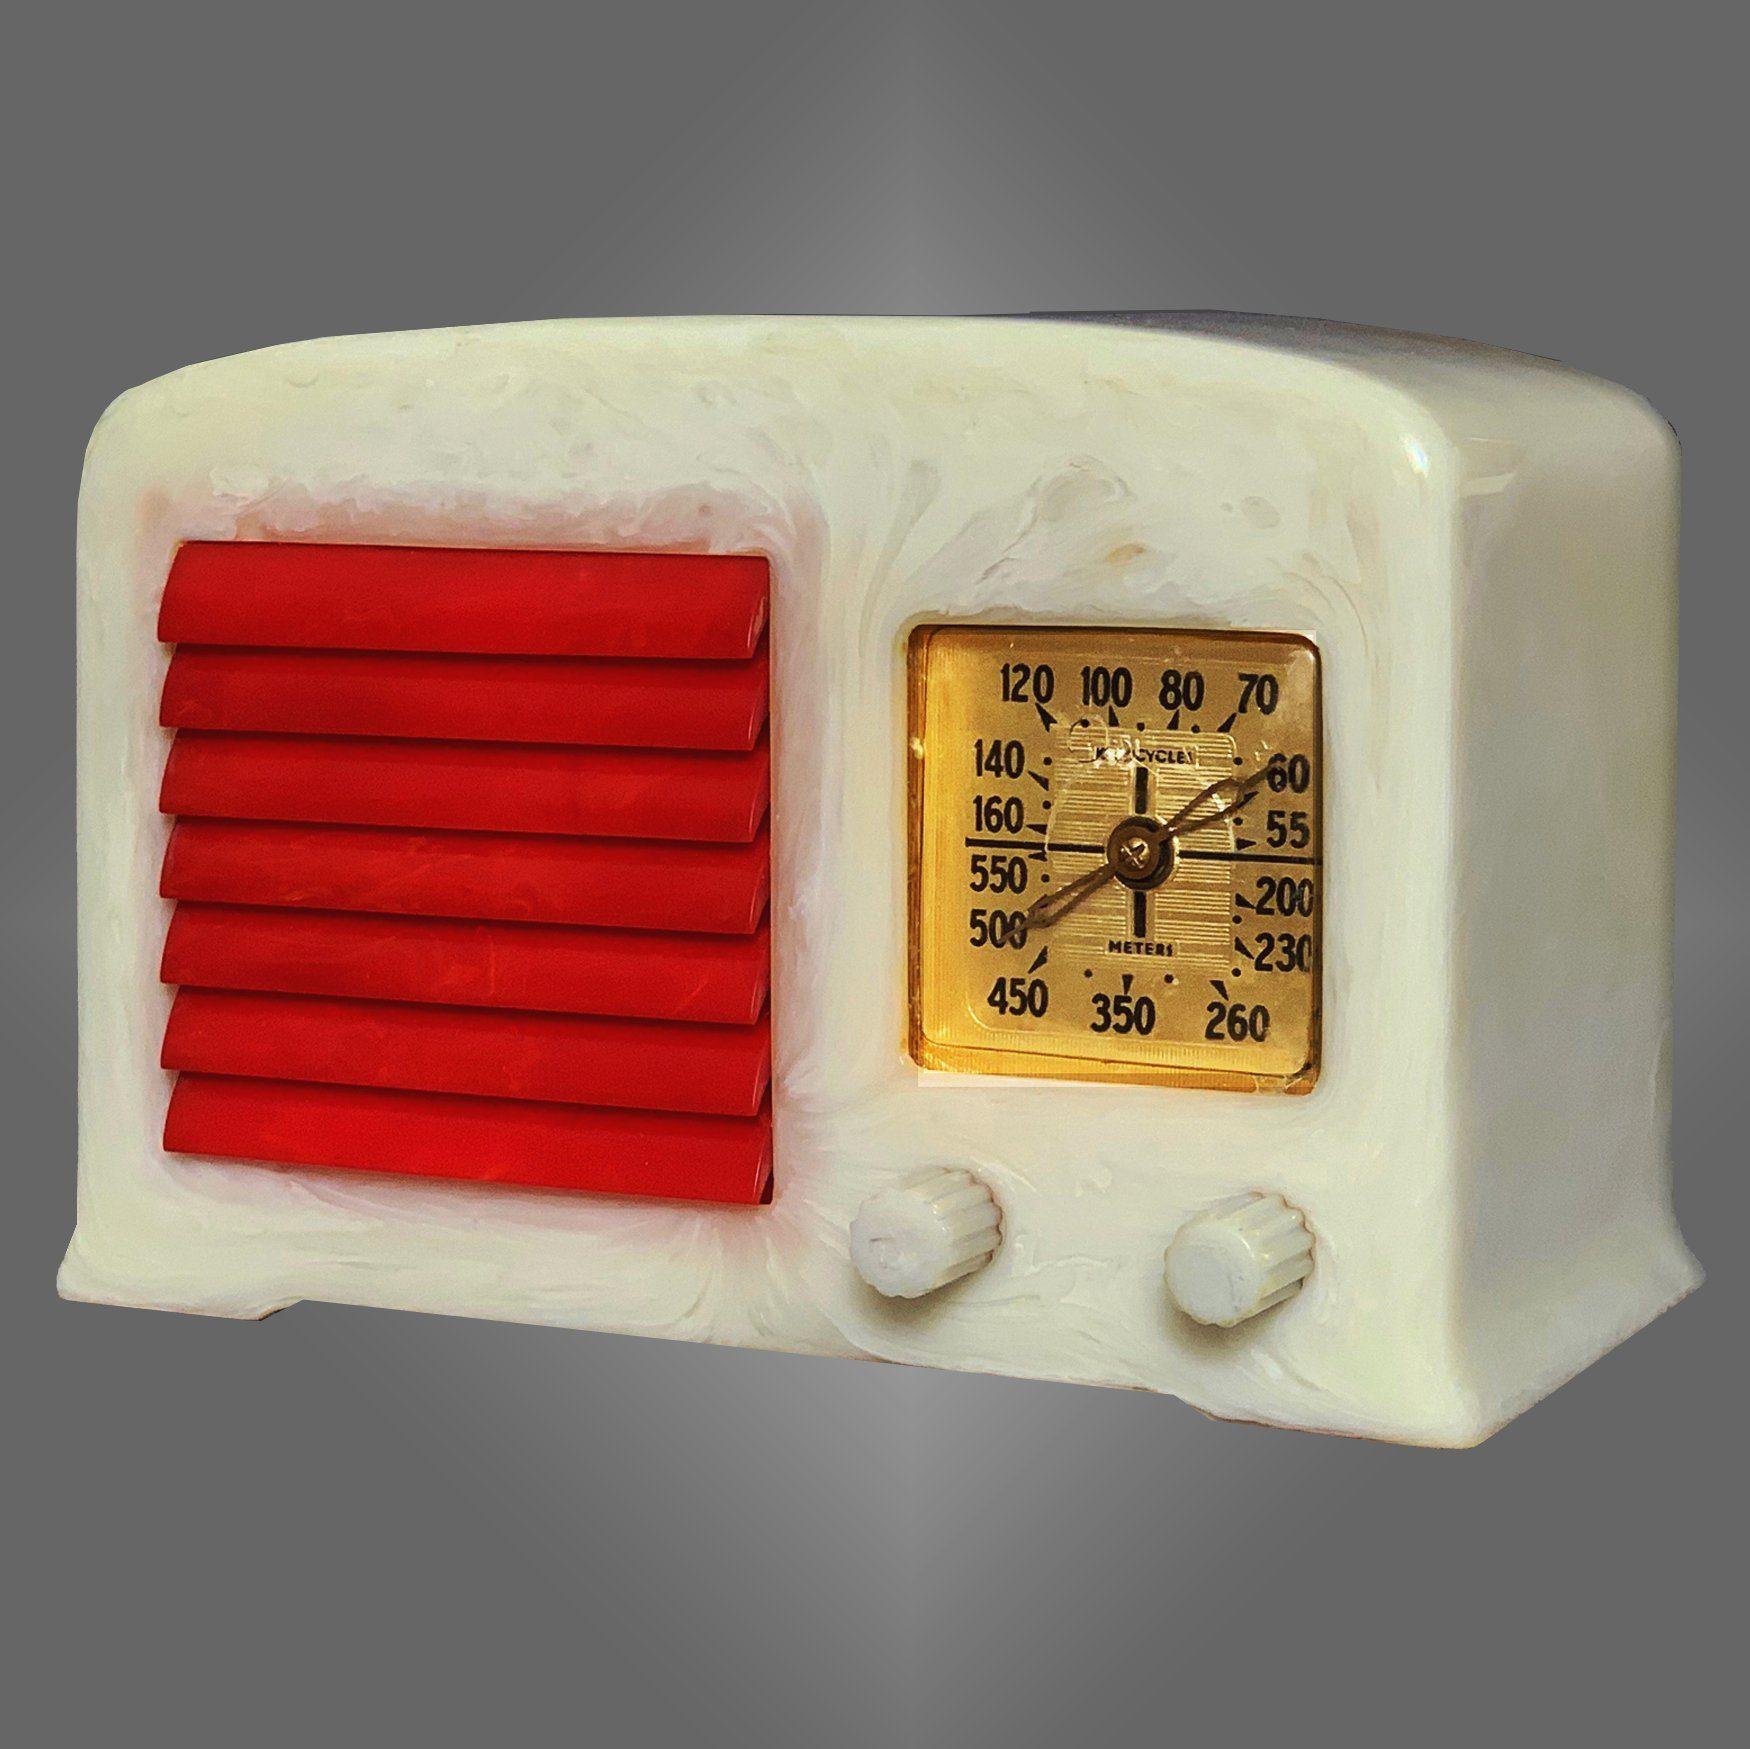 FADA 5F50 53 Catalin Radio- Alabaster with "Cherry" Red Grille